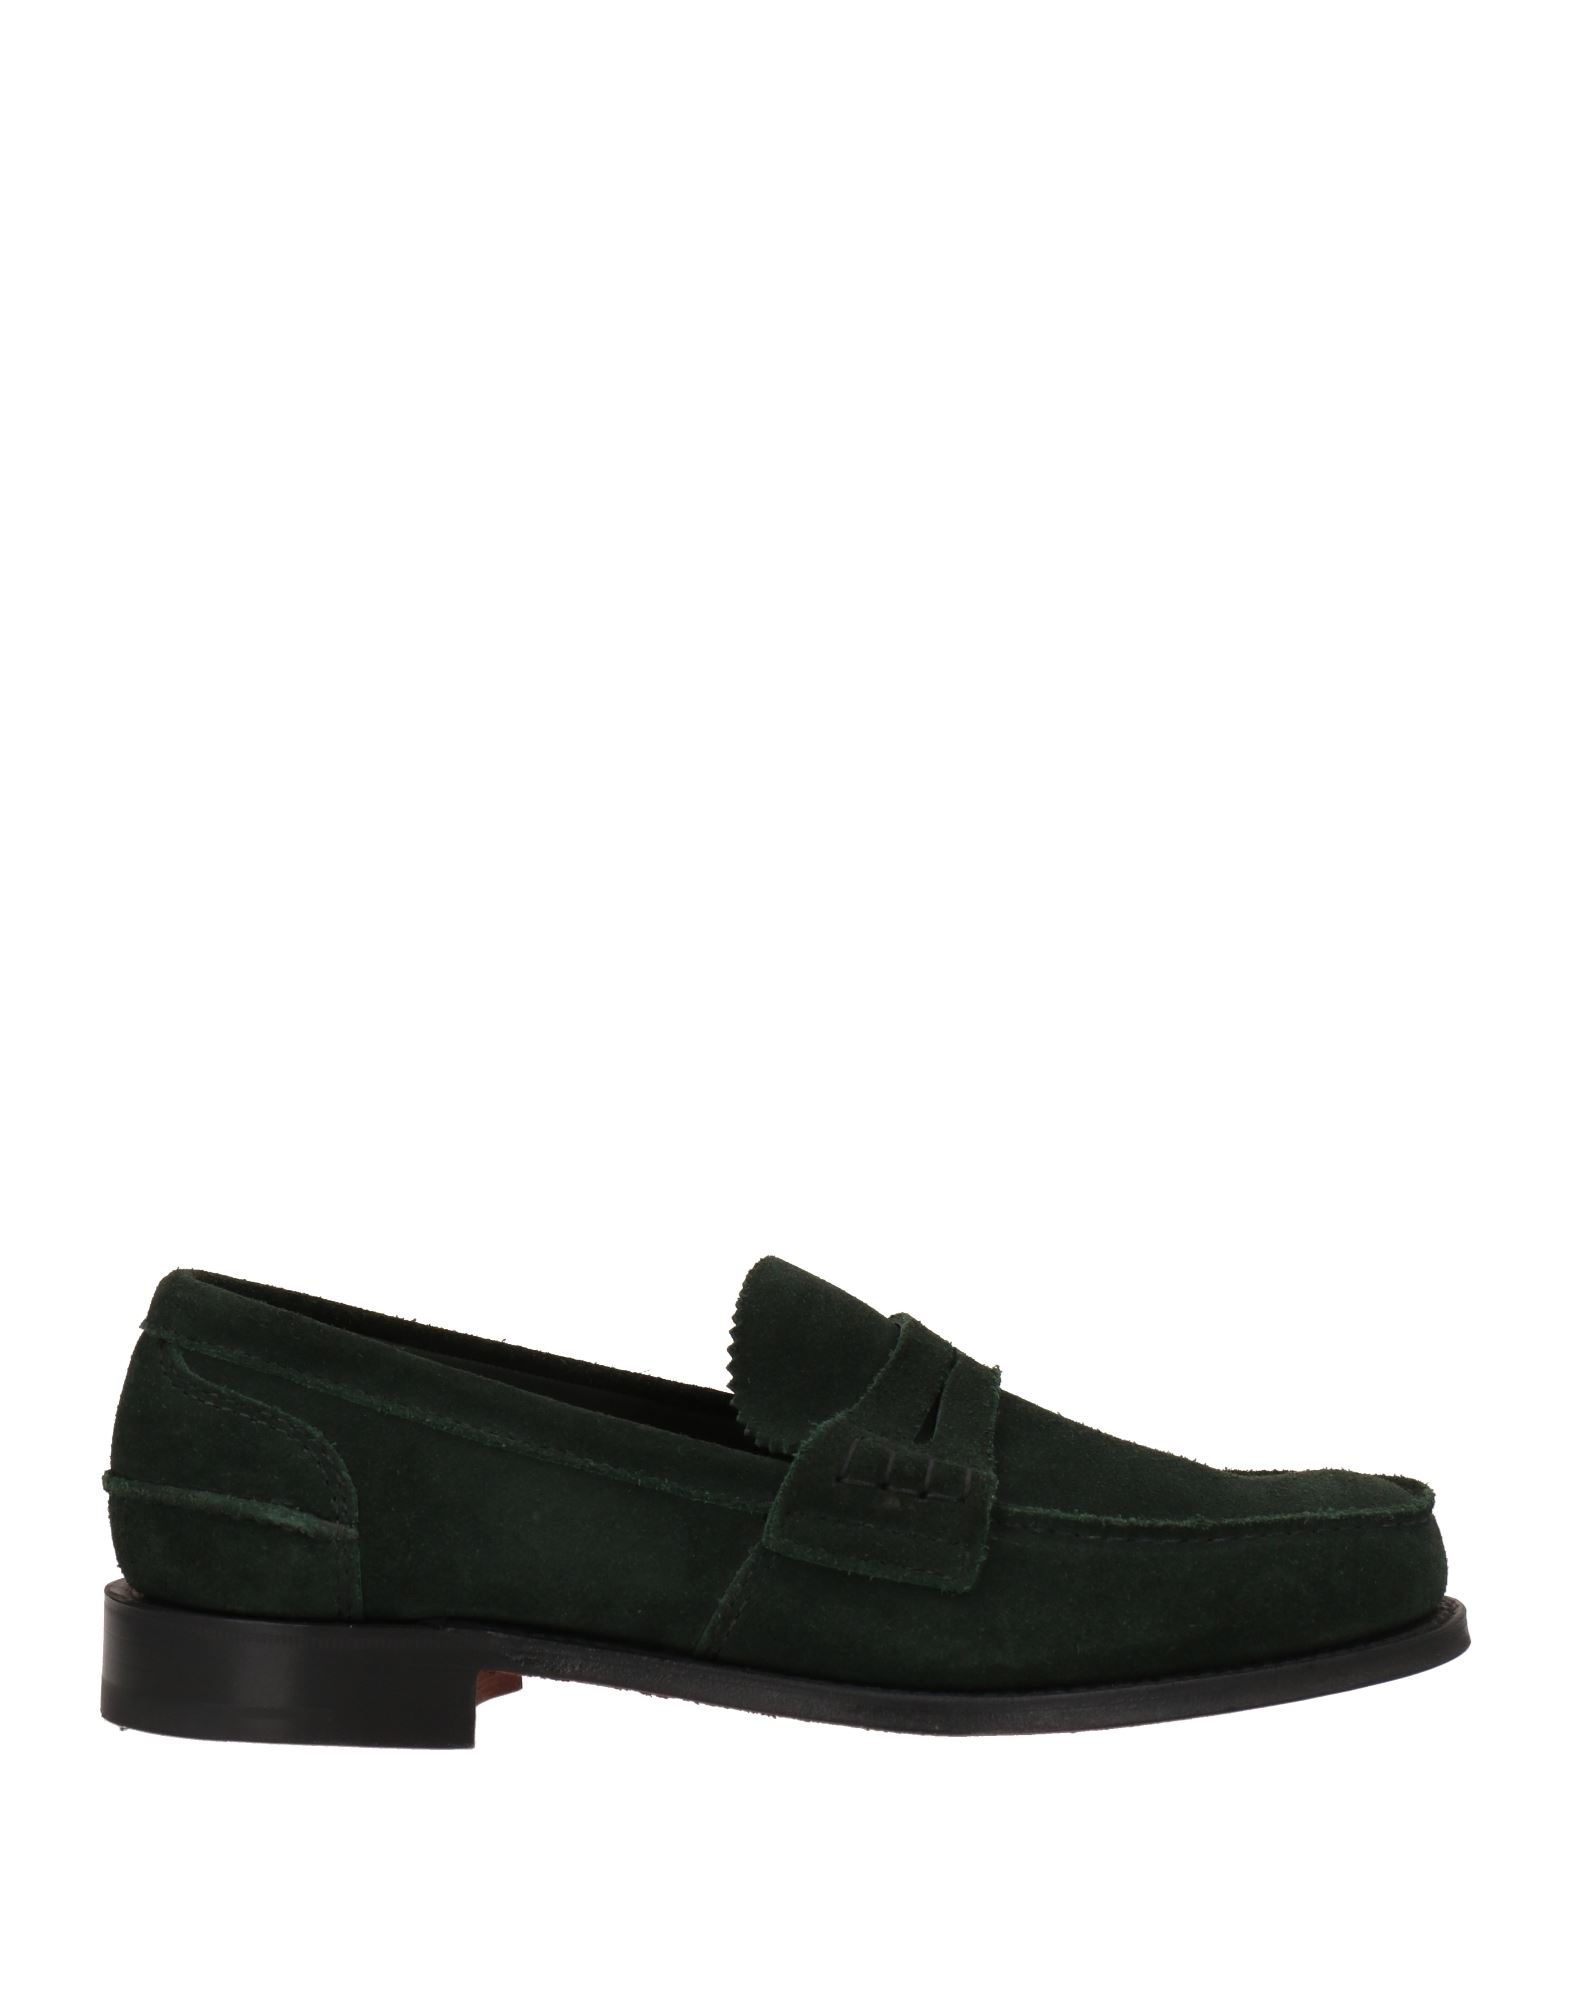 CHURCH'S CHURCH'S MAN LOAFERS DARK GREEN SIZE 9.5 SOFT LEATHER